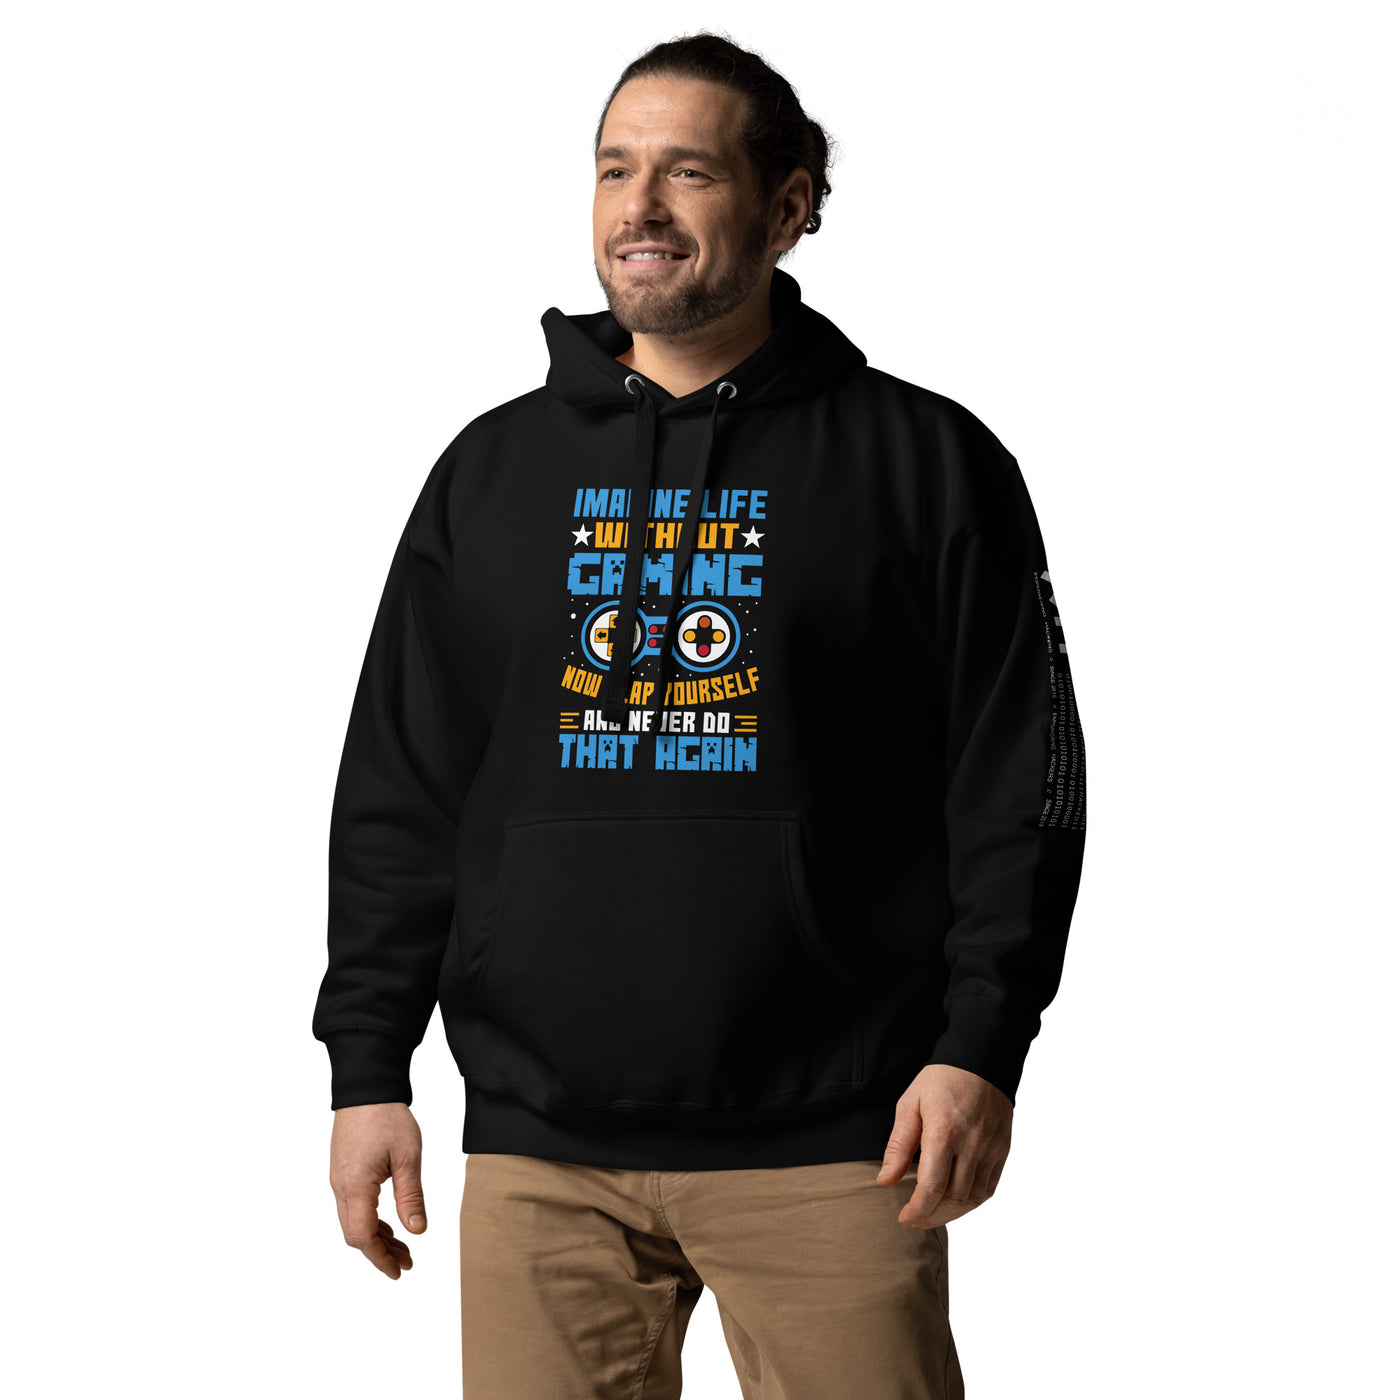 Imagine Life Without Gaming Now Slap Yourself and Never Do that again Rima 15 - Unisex Hoodie